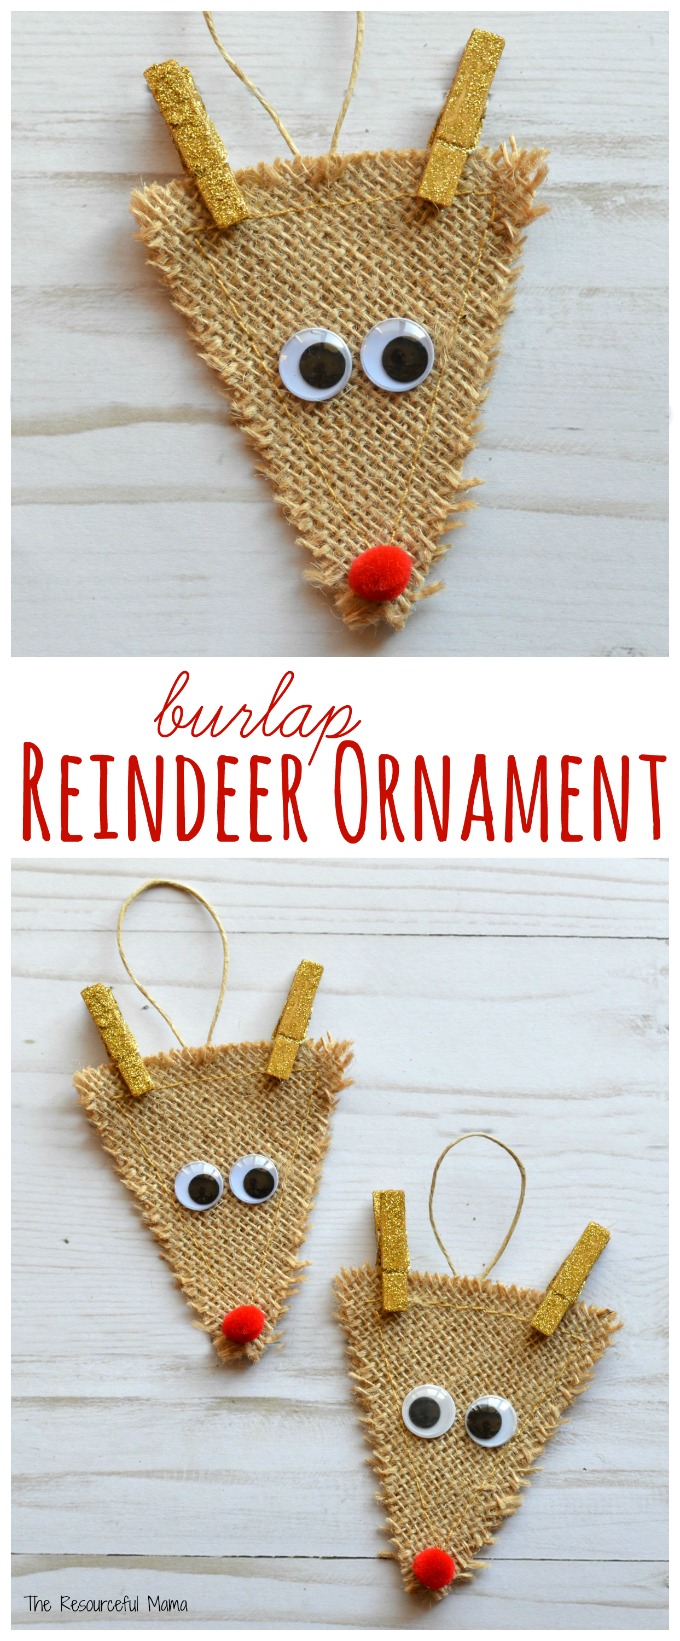 Kids will love making this reindeer ornament inspired by a favorite Christmastime character, Rudolph the Red Nosed Reindeer for the Christmas tree.